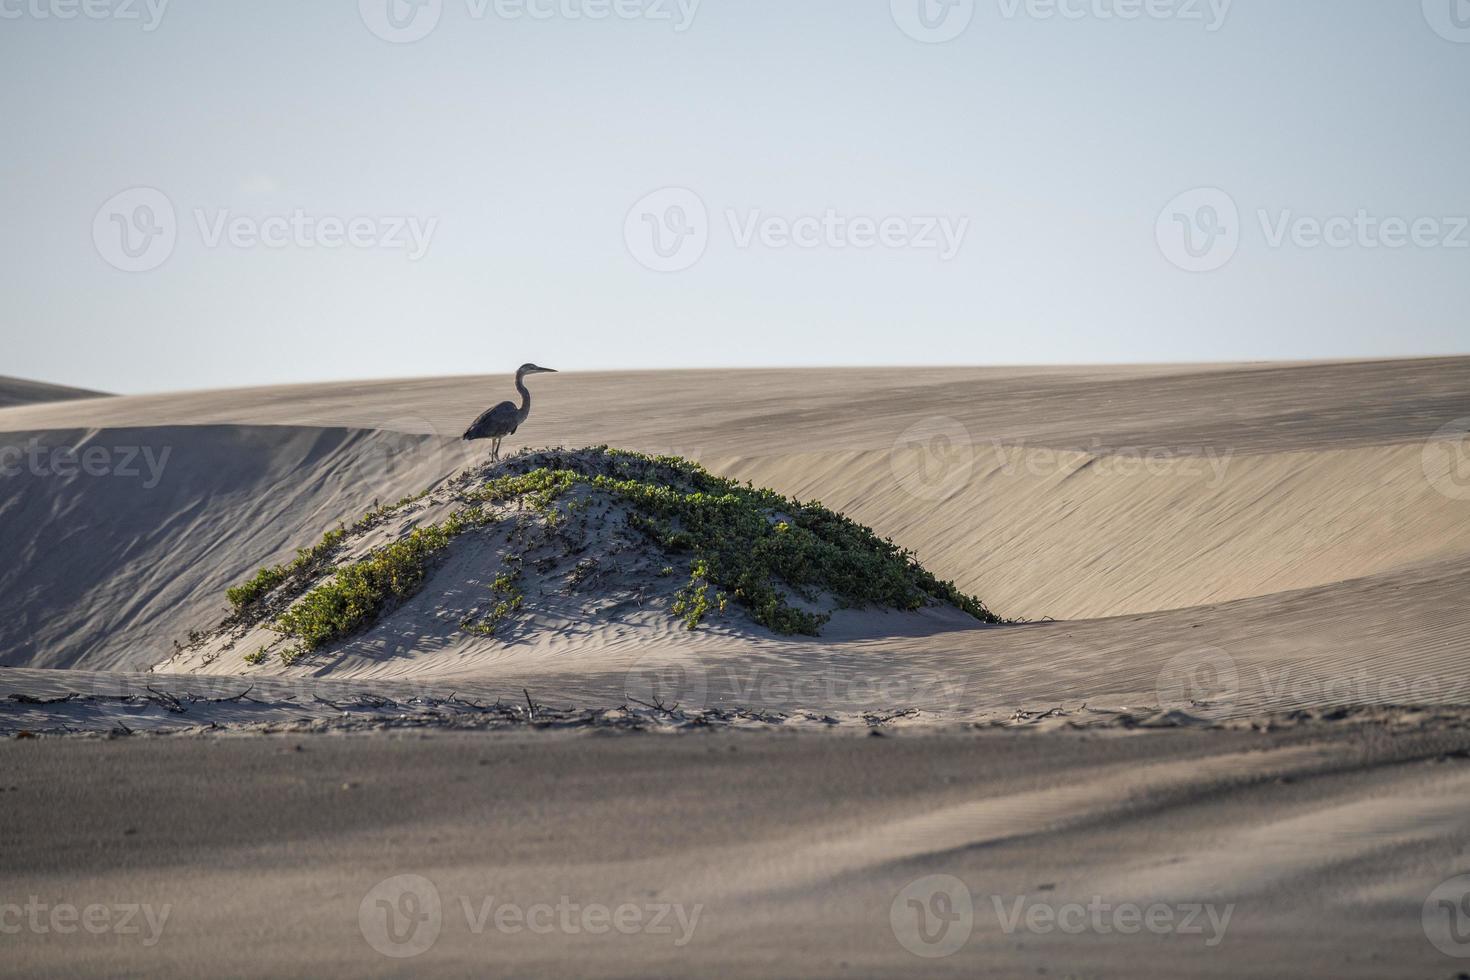 blue heron on the sand in california photo